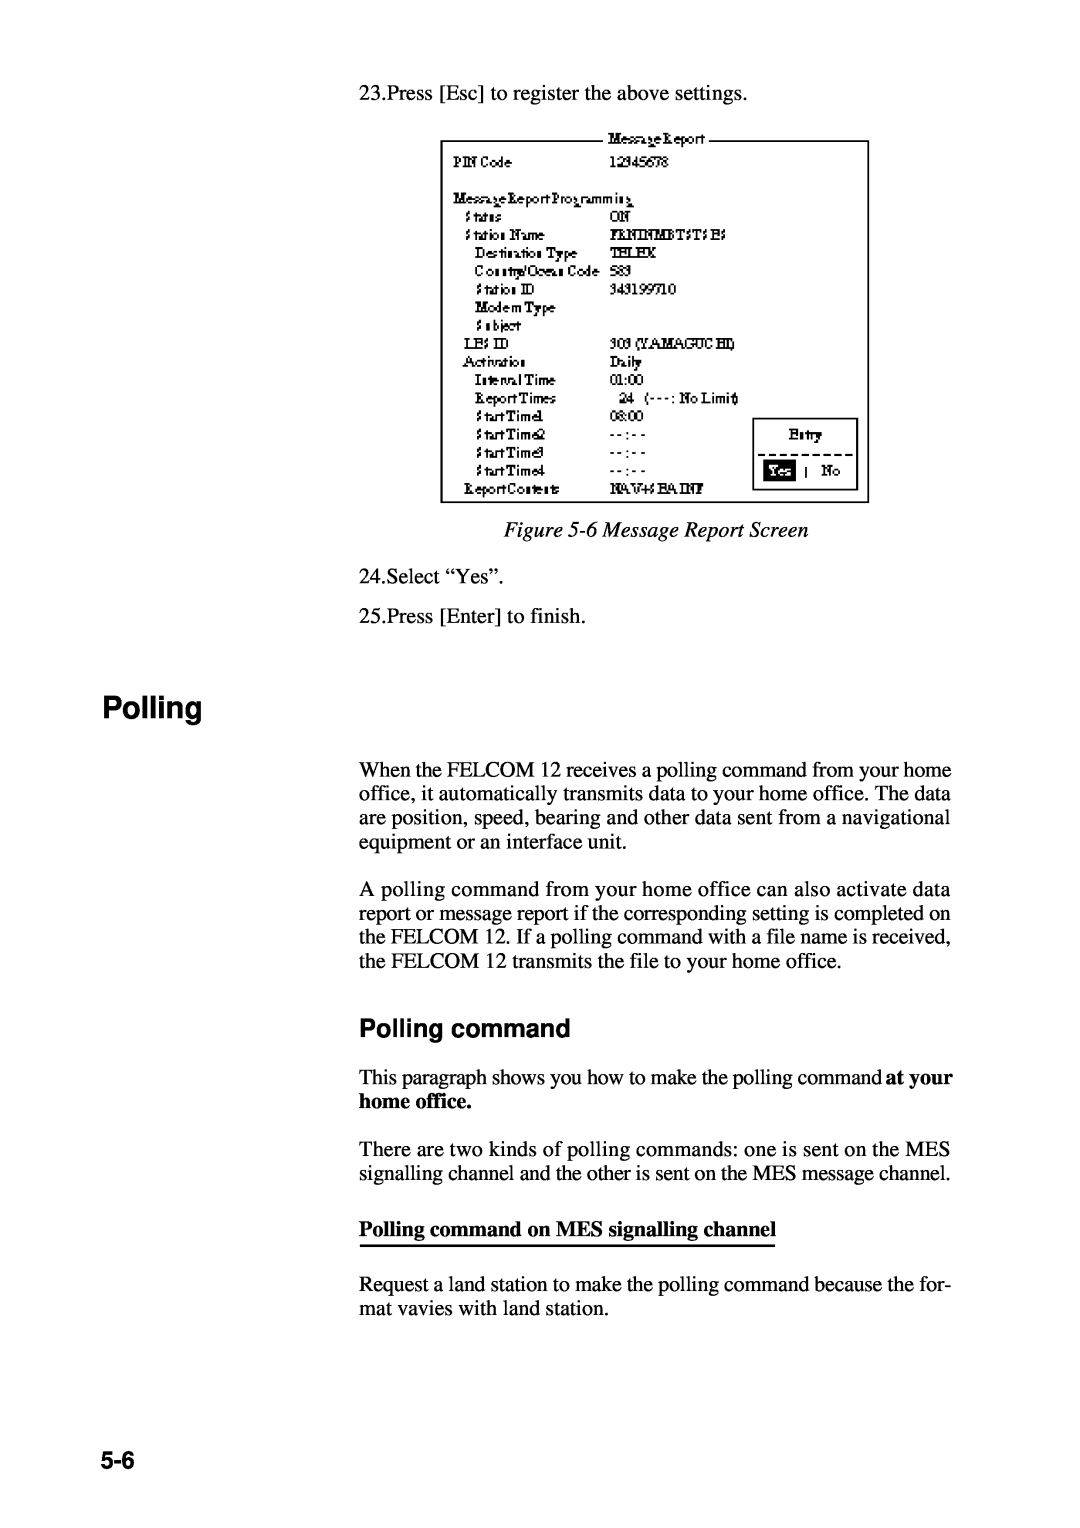 Furuno RC-1500-1T manual Polling command, 6 Message Report Screen 